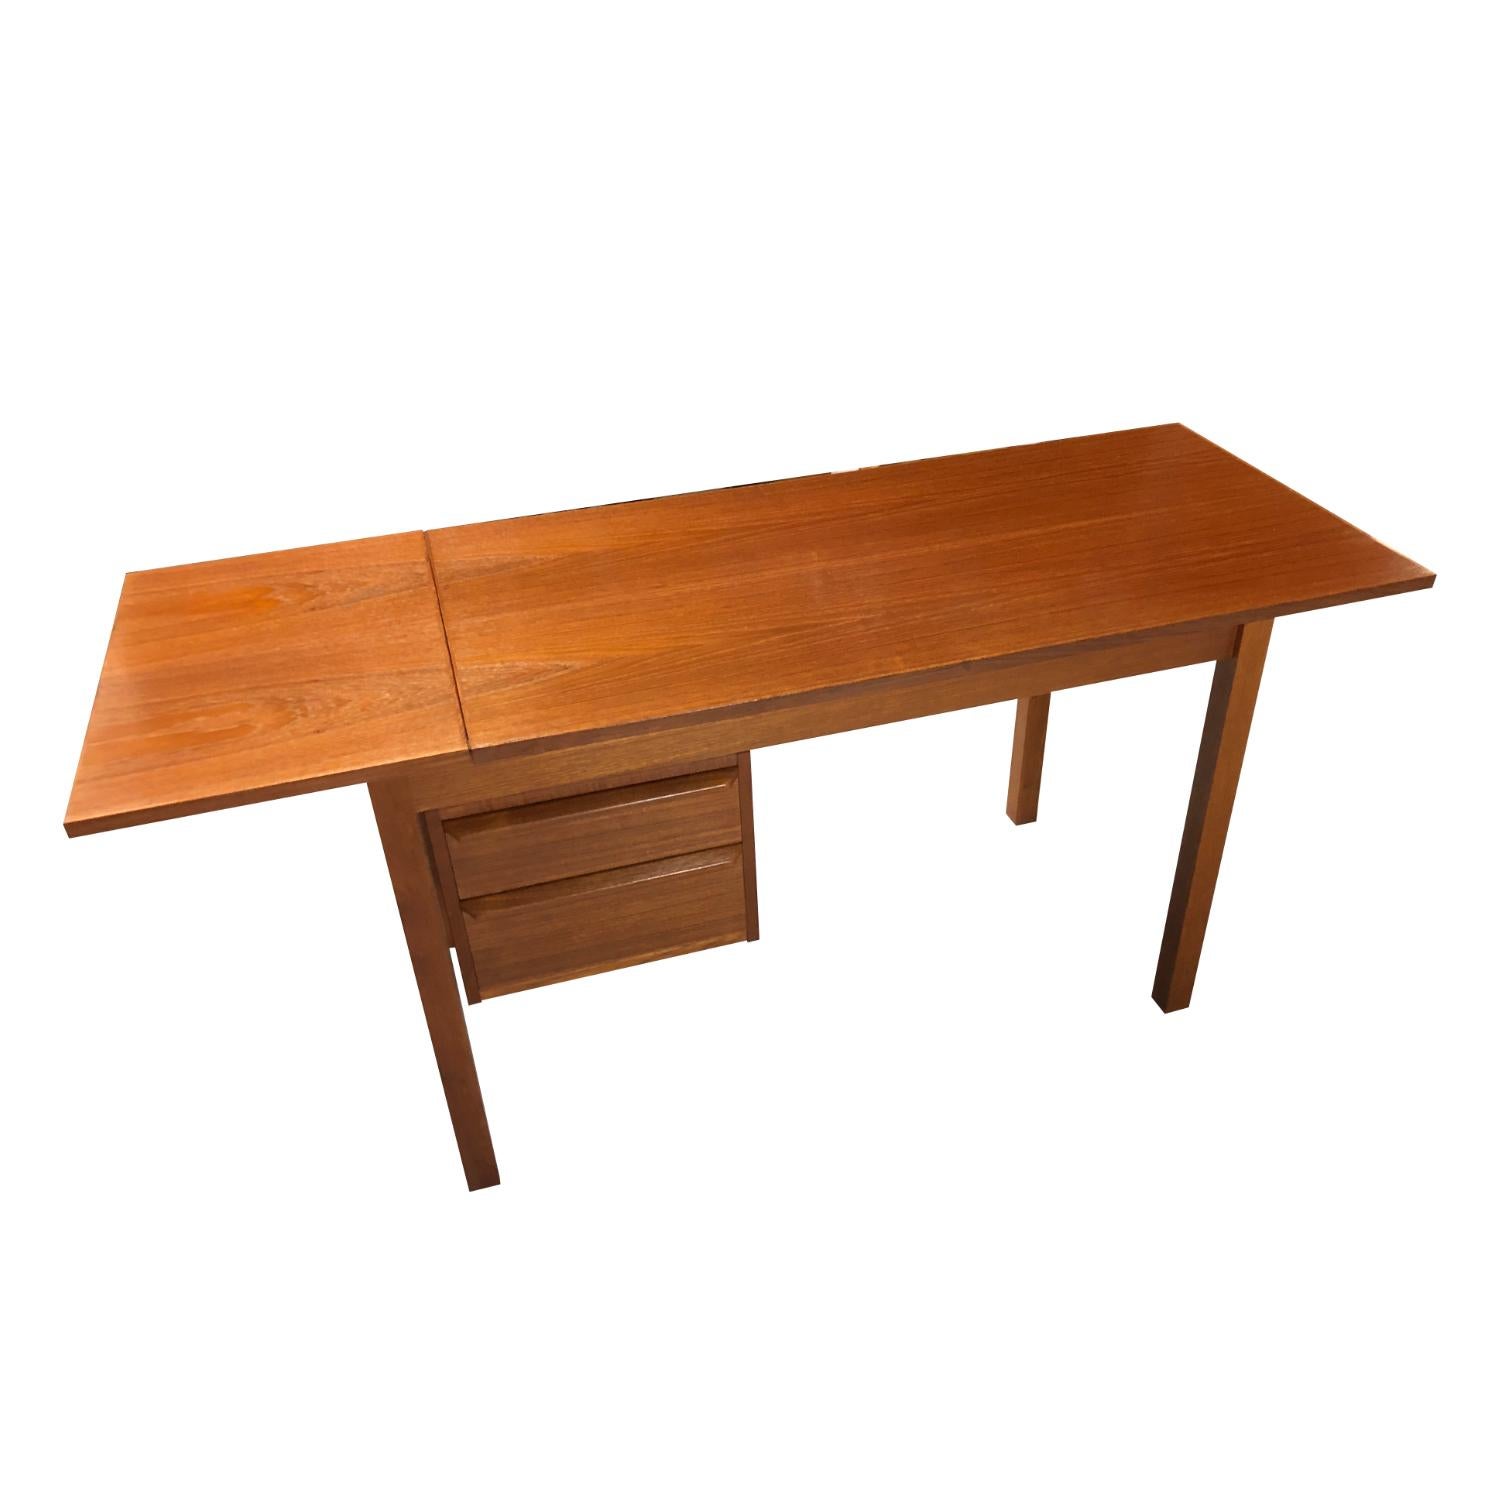 This expanding Danish teak desk by G.V. Mobler provides a ton of functionality in a compact package. The table top and the drawers are adjustable! Lift the drop-leaf and slide the table top to center it over the legs. The leaf extension lengthens